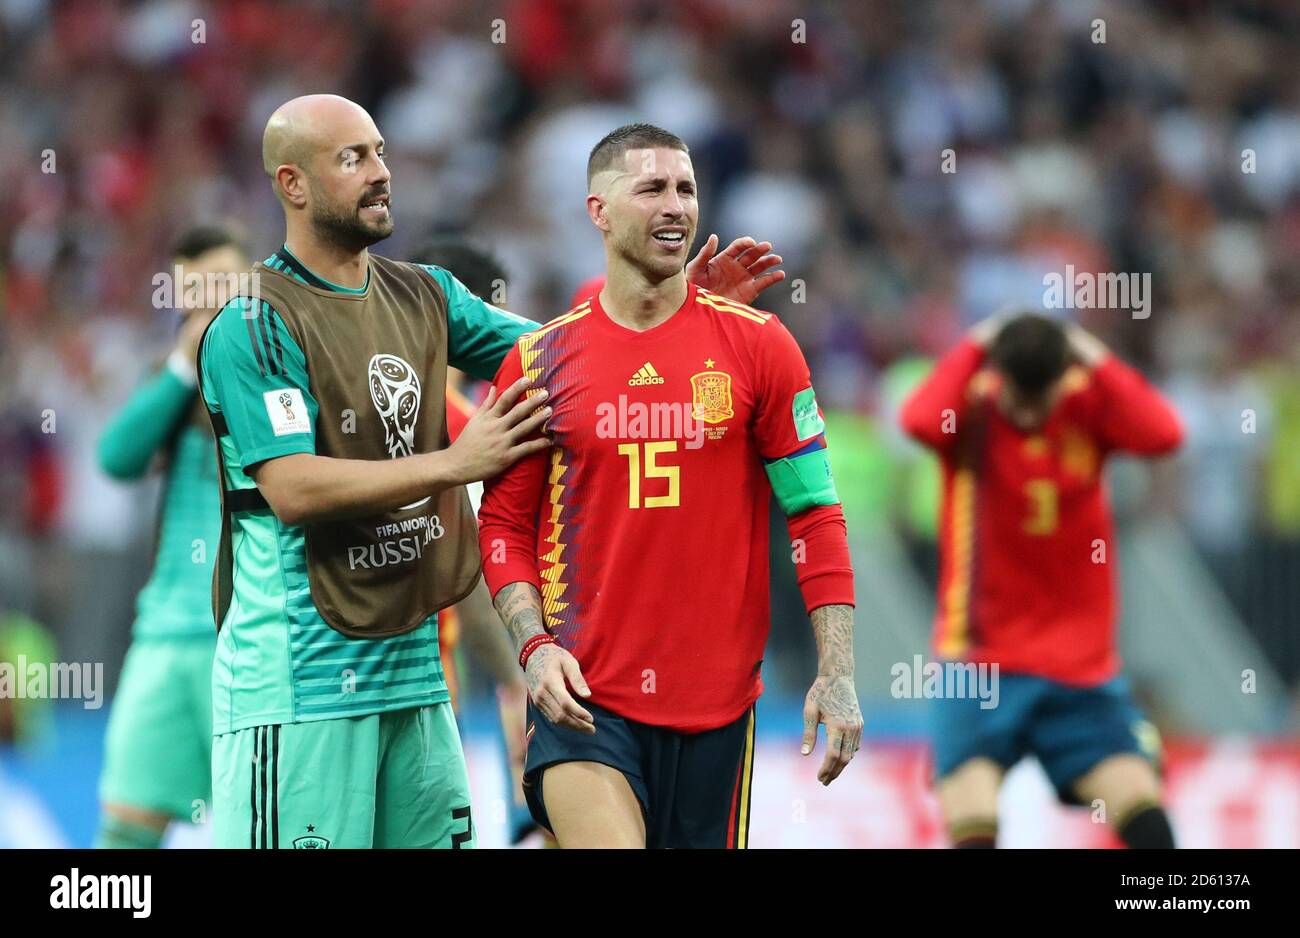 Spain goalkeeper Pepe Reina commiserates with team-mate Sergio Ramos after the final whistle Stock Photo